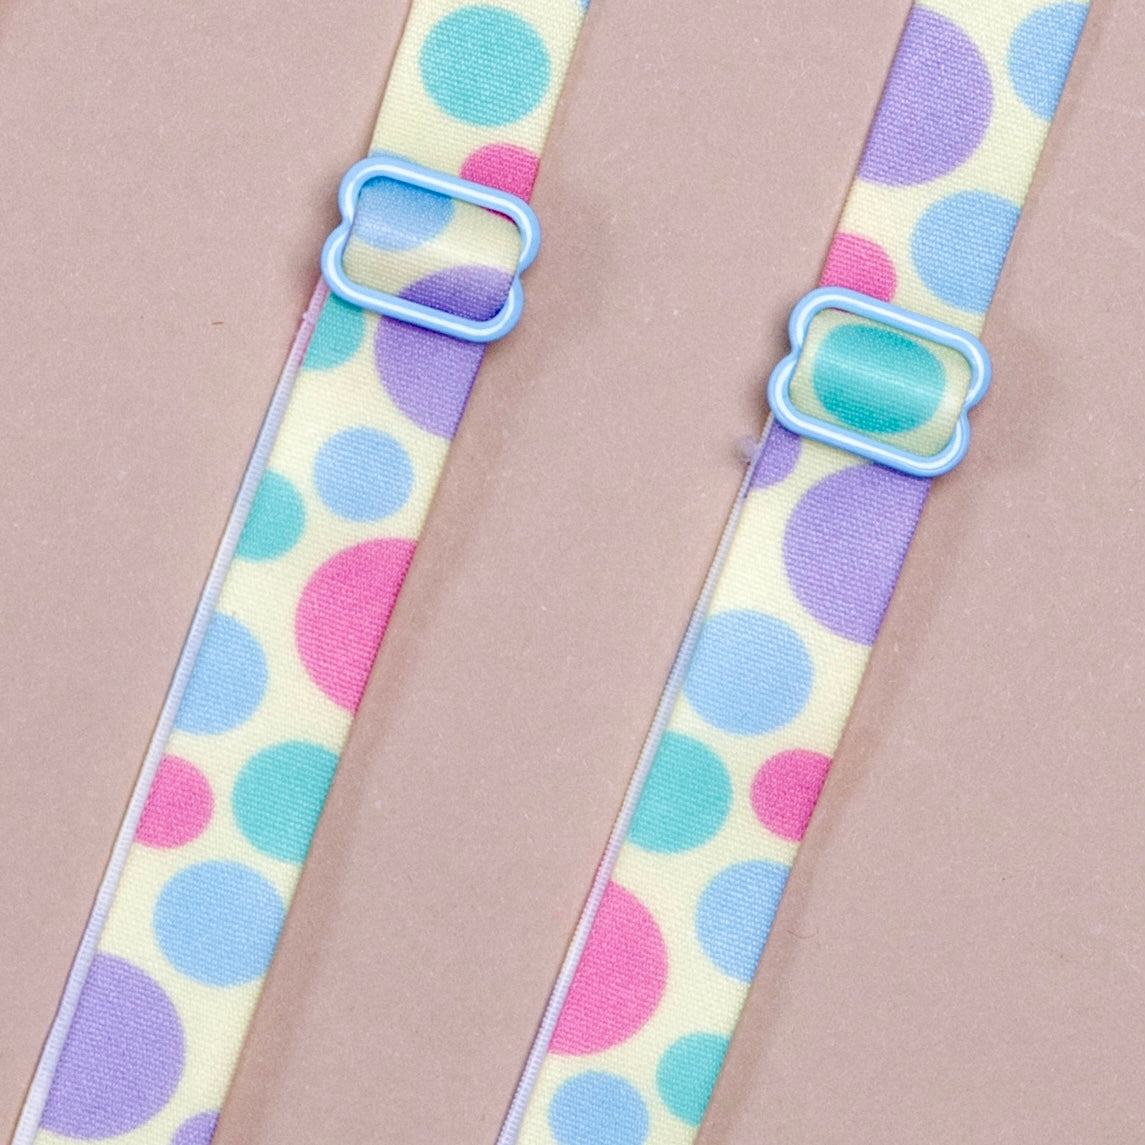 Spring Fling Her-Rah Straps: White straps with a mix of various size polka dots in light blue, periwinkle, and hot pink, featuring blue coated hardware.